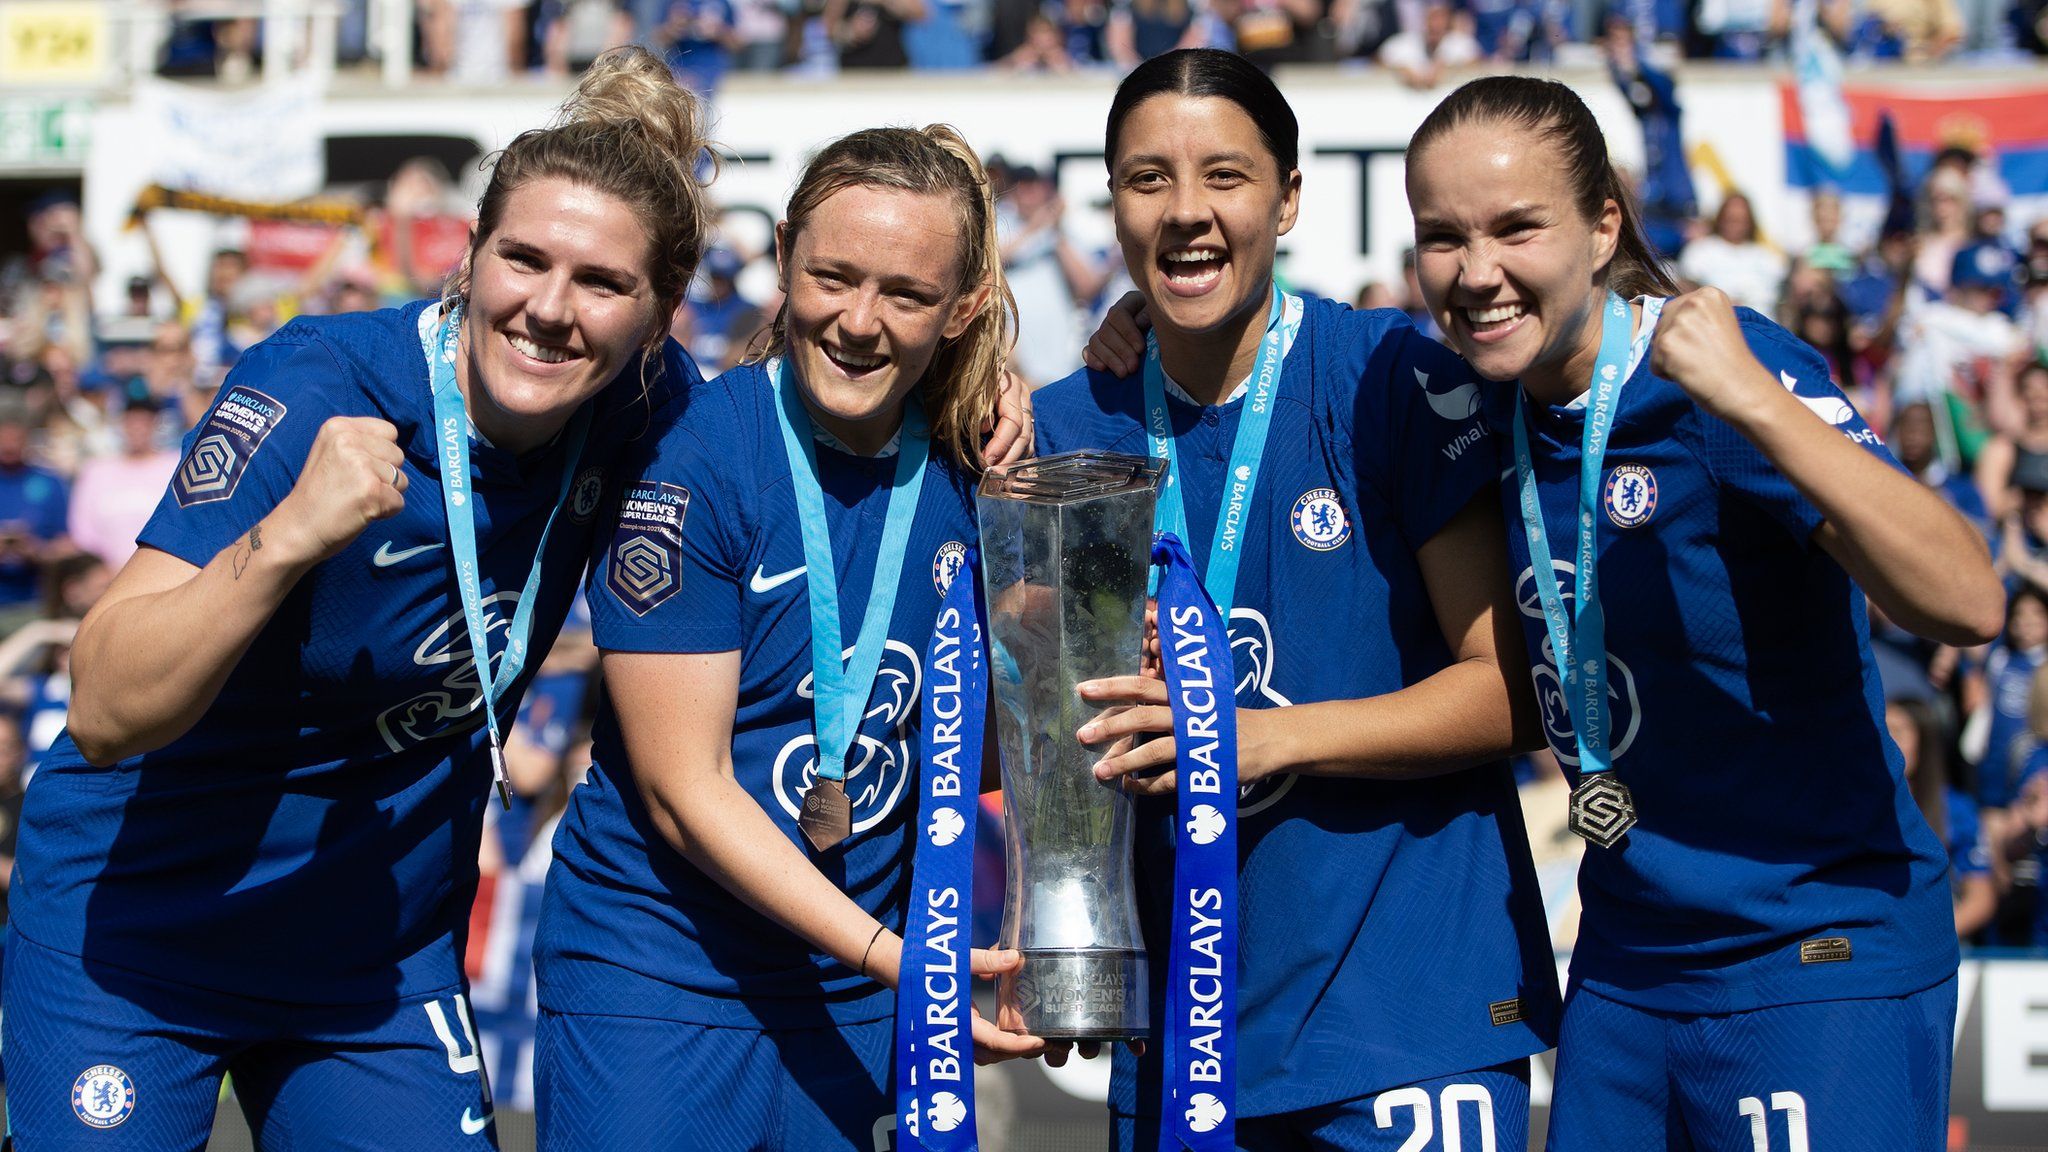 Chelsea's Millie Bright, Erin Cuthbert, Sam Kerr and Guro Reiten celebrate with the Women's Super League trophy